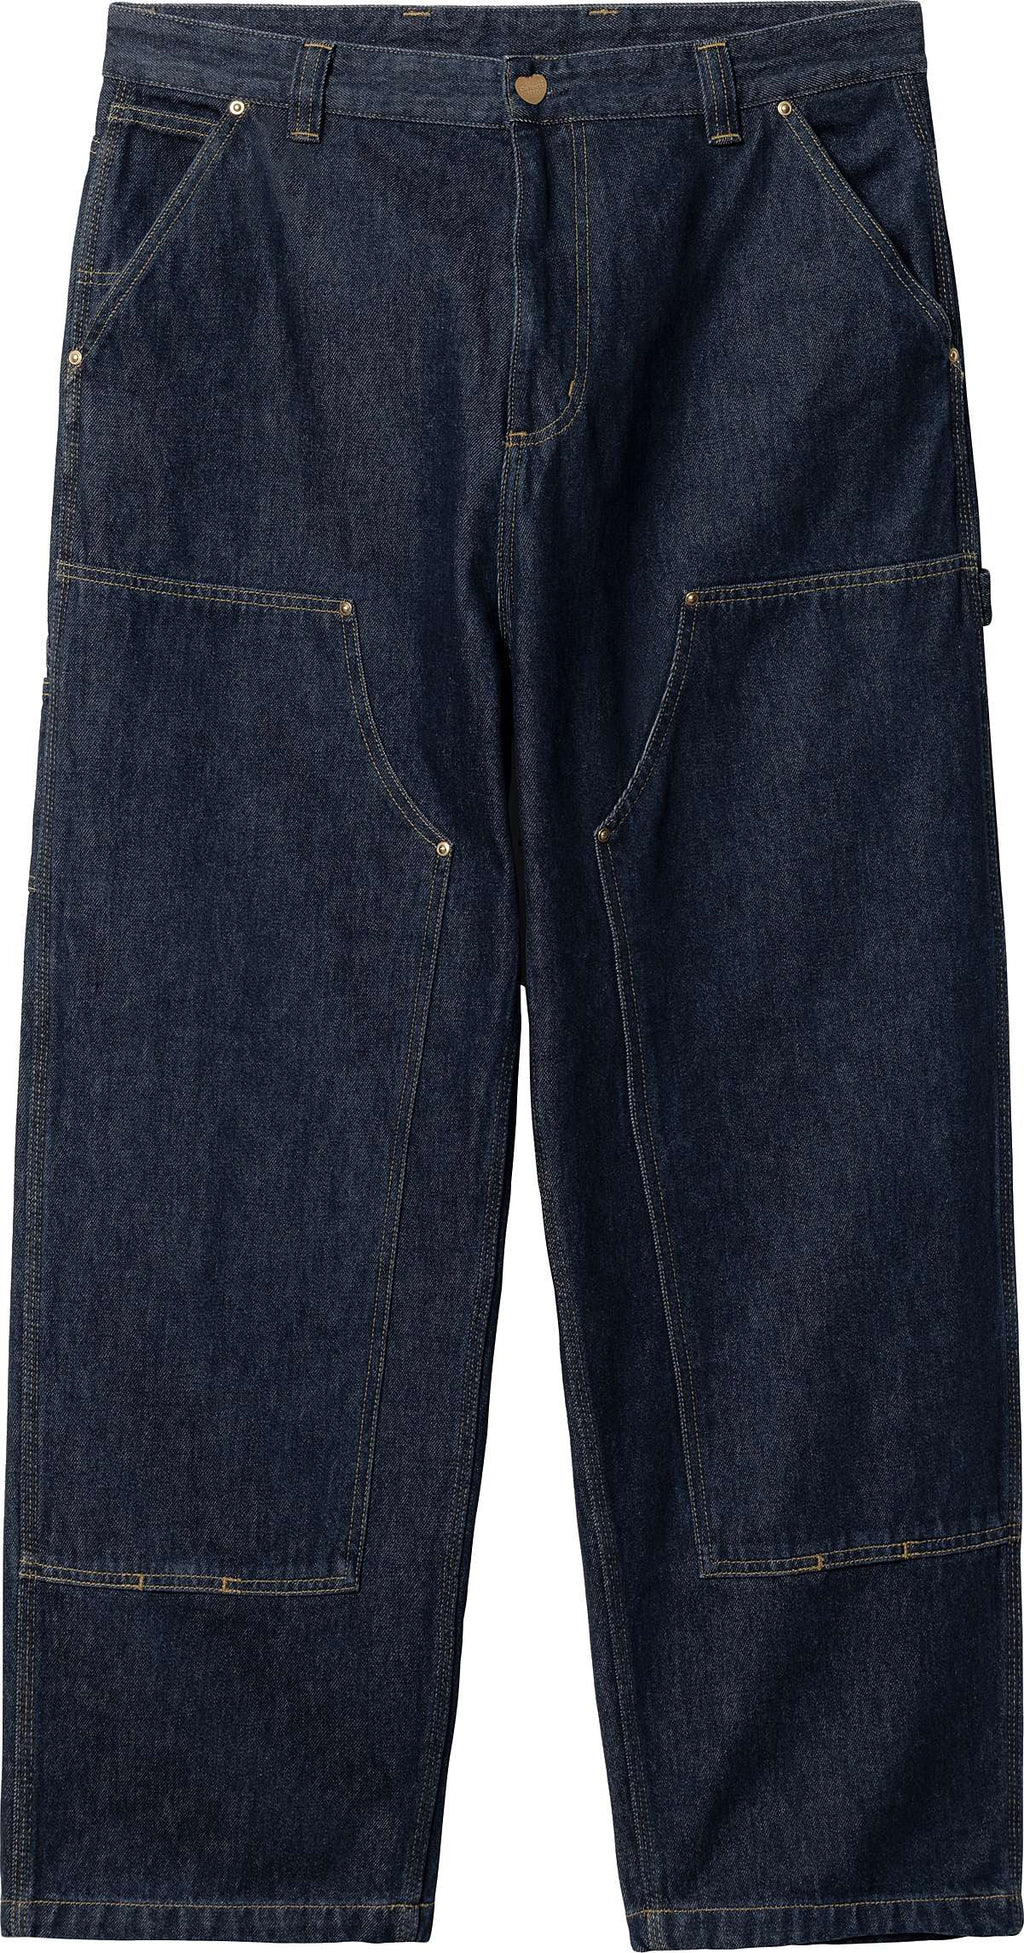  Carhartt Wip Jeans Nash Dk Pant Blue Rinsed Donna - 1